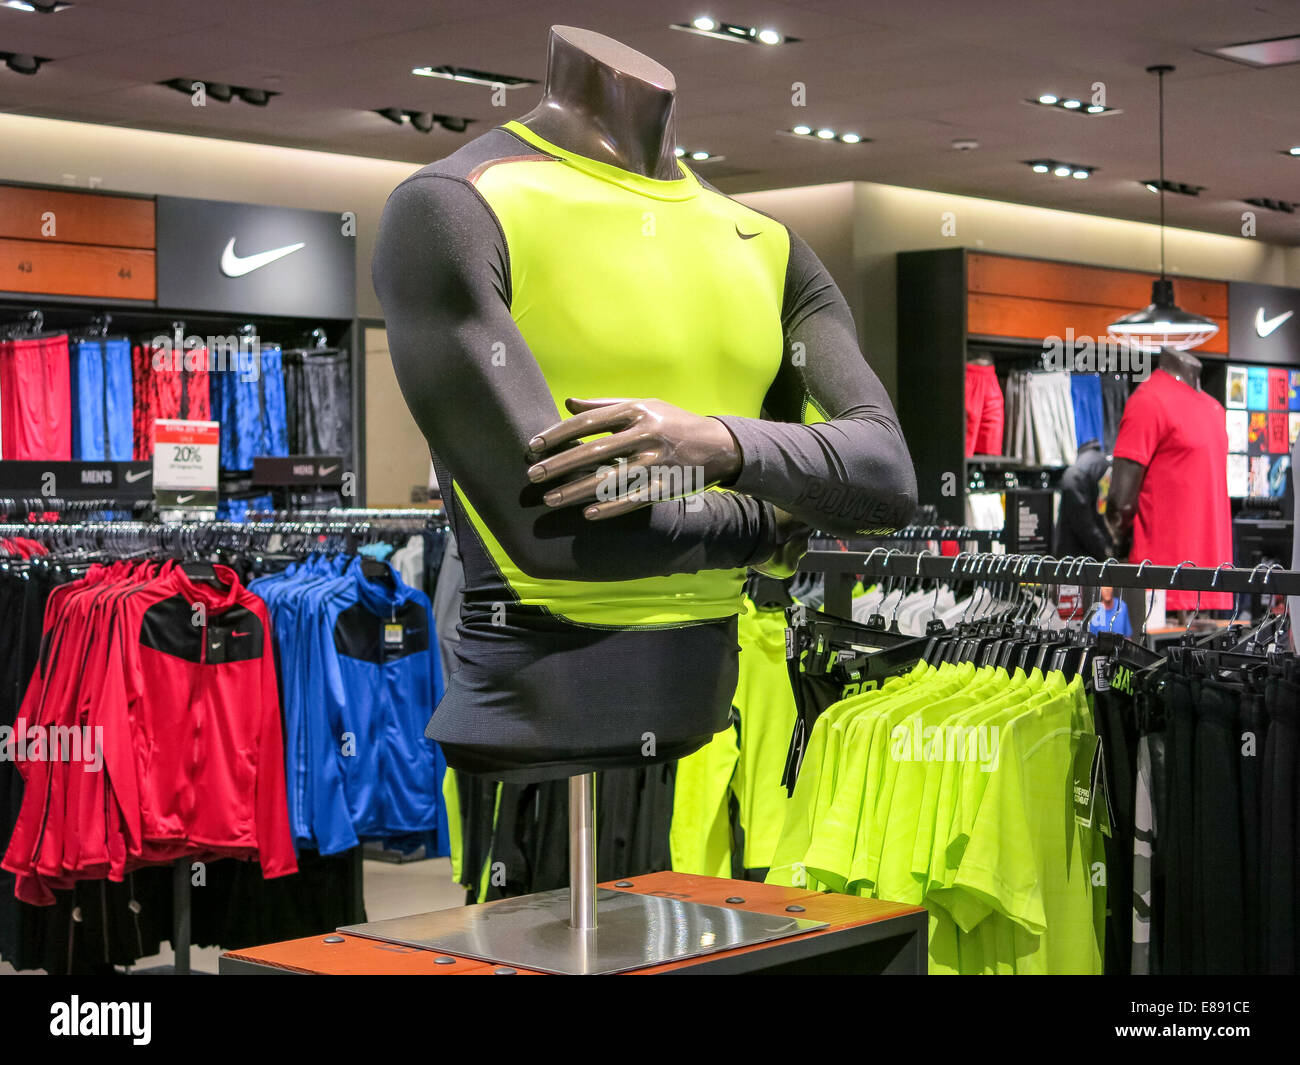 Nike Athletic Clothing with Swoosh Logo, Display, Macy's Department ...